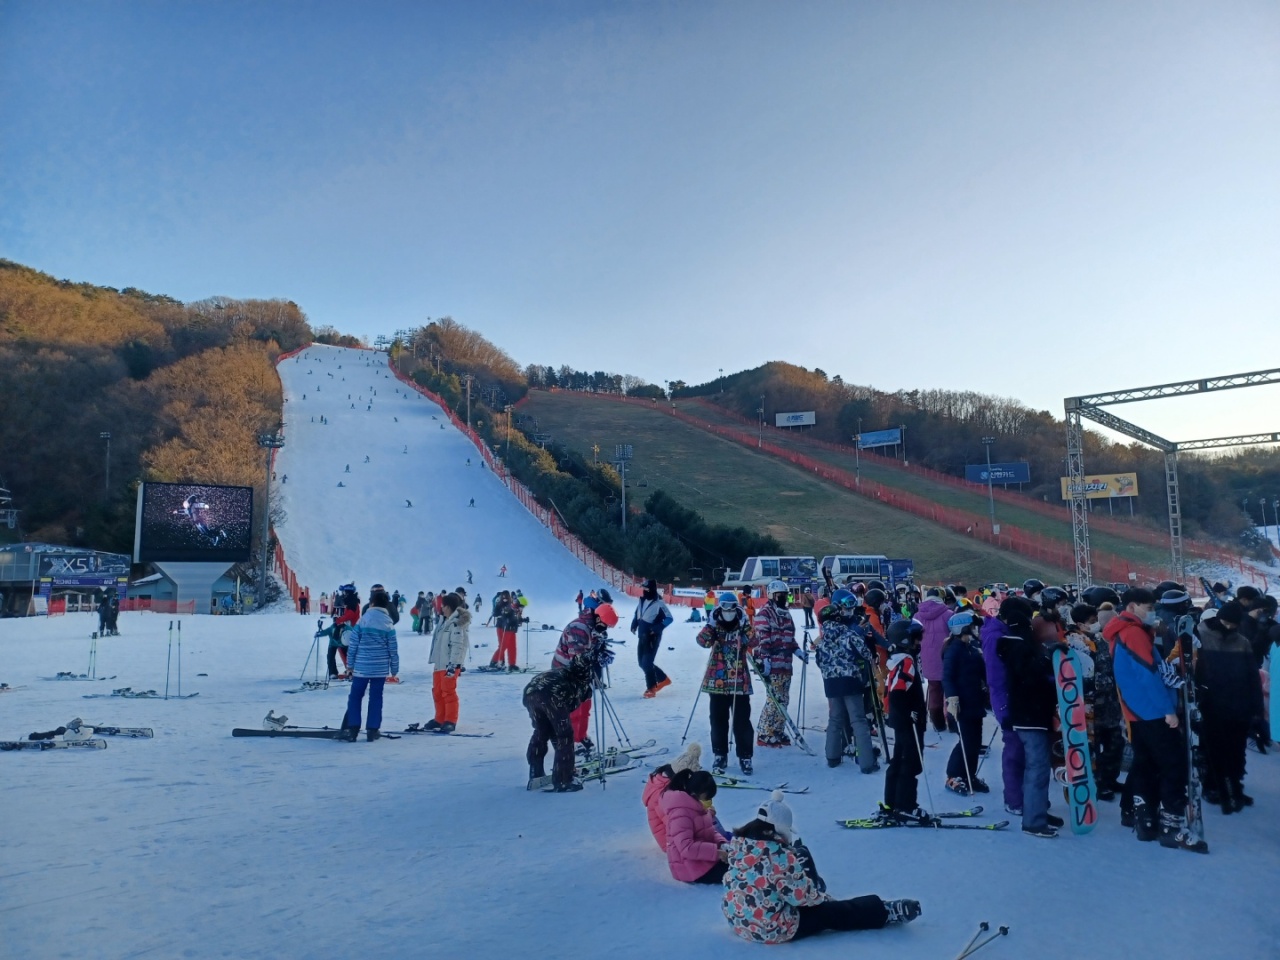 People enjoy winter activities at Vivaldi Park in Hongcheon, Gangwon Province, Dec. 4. On the right side of the photograph, some of the park’s slopes can be seen closed. (Lee Si-jin/The Korea Herald)